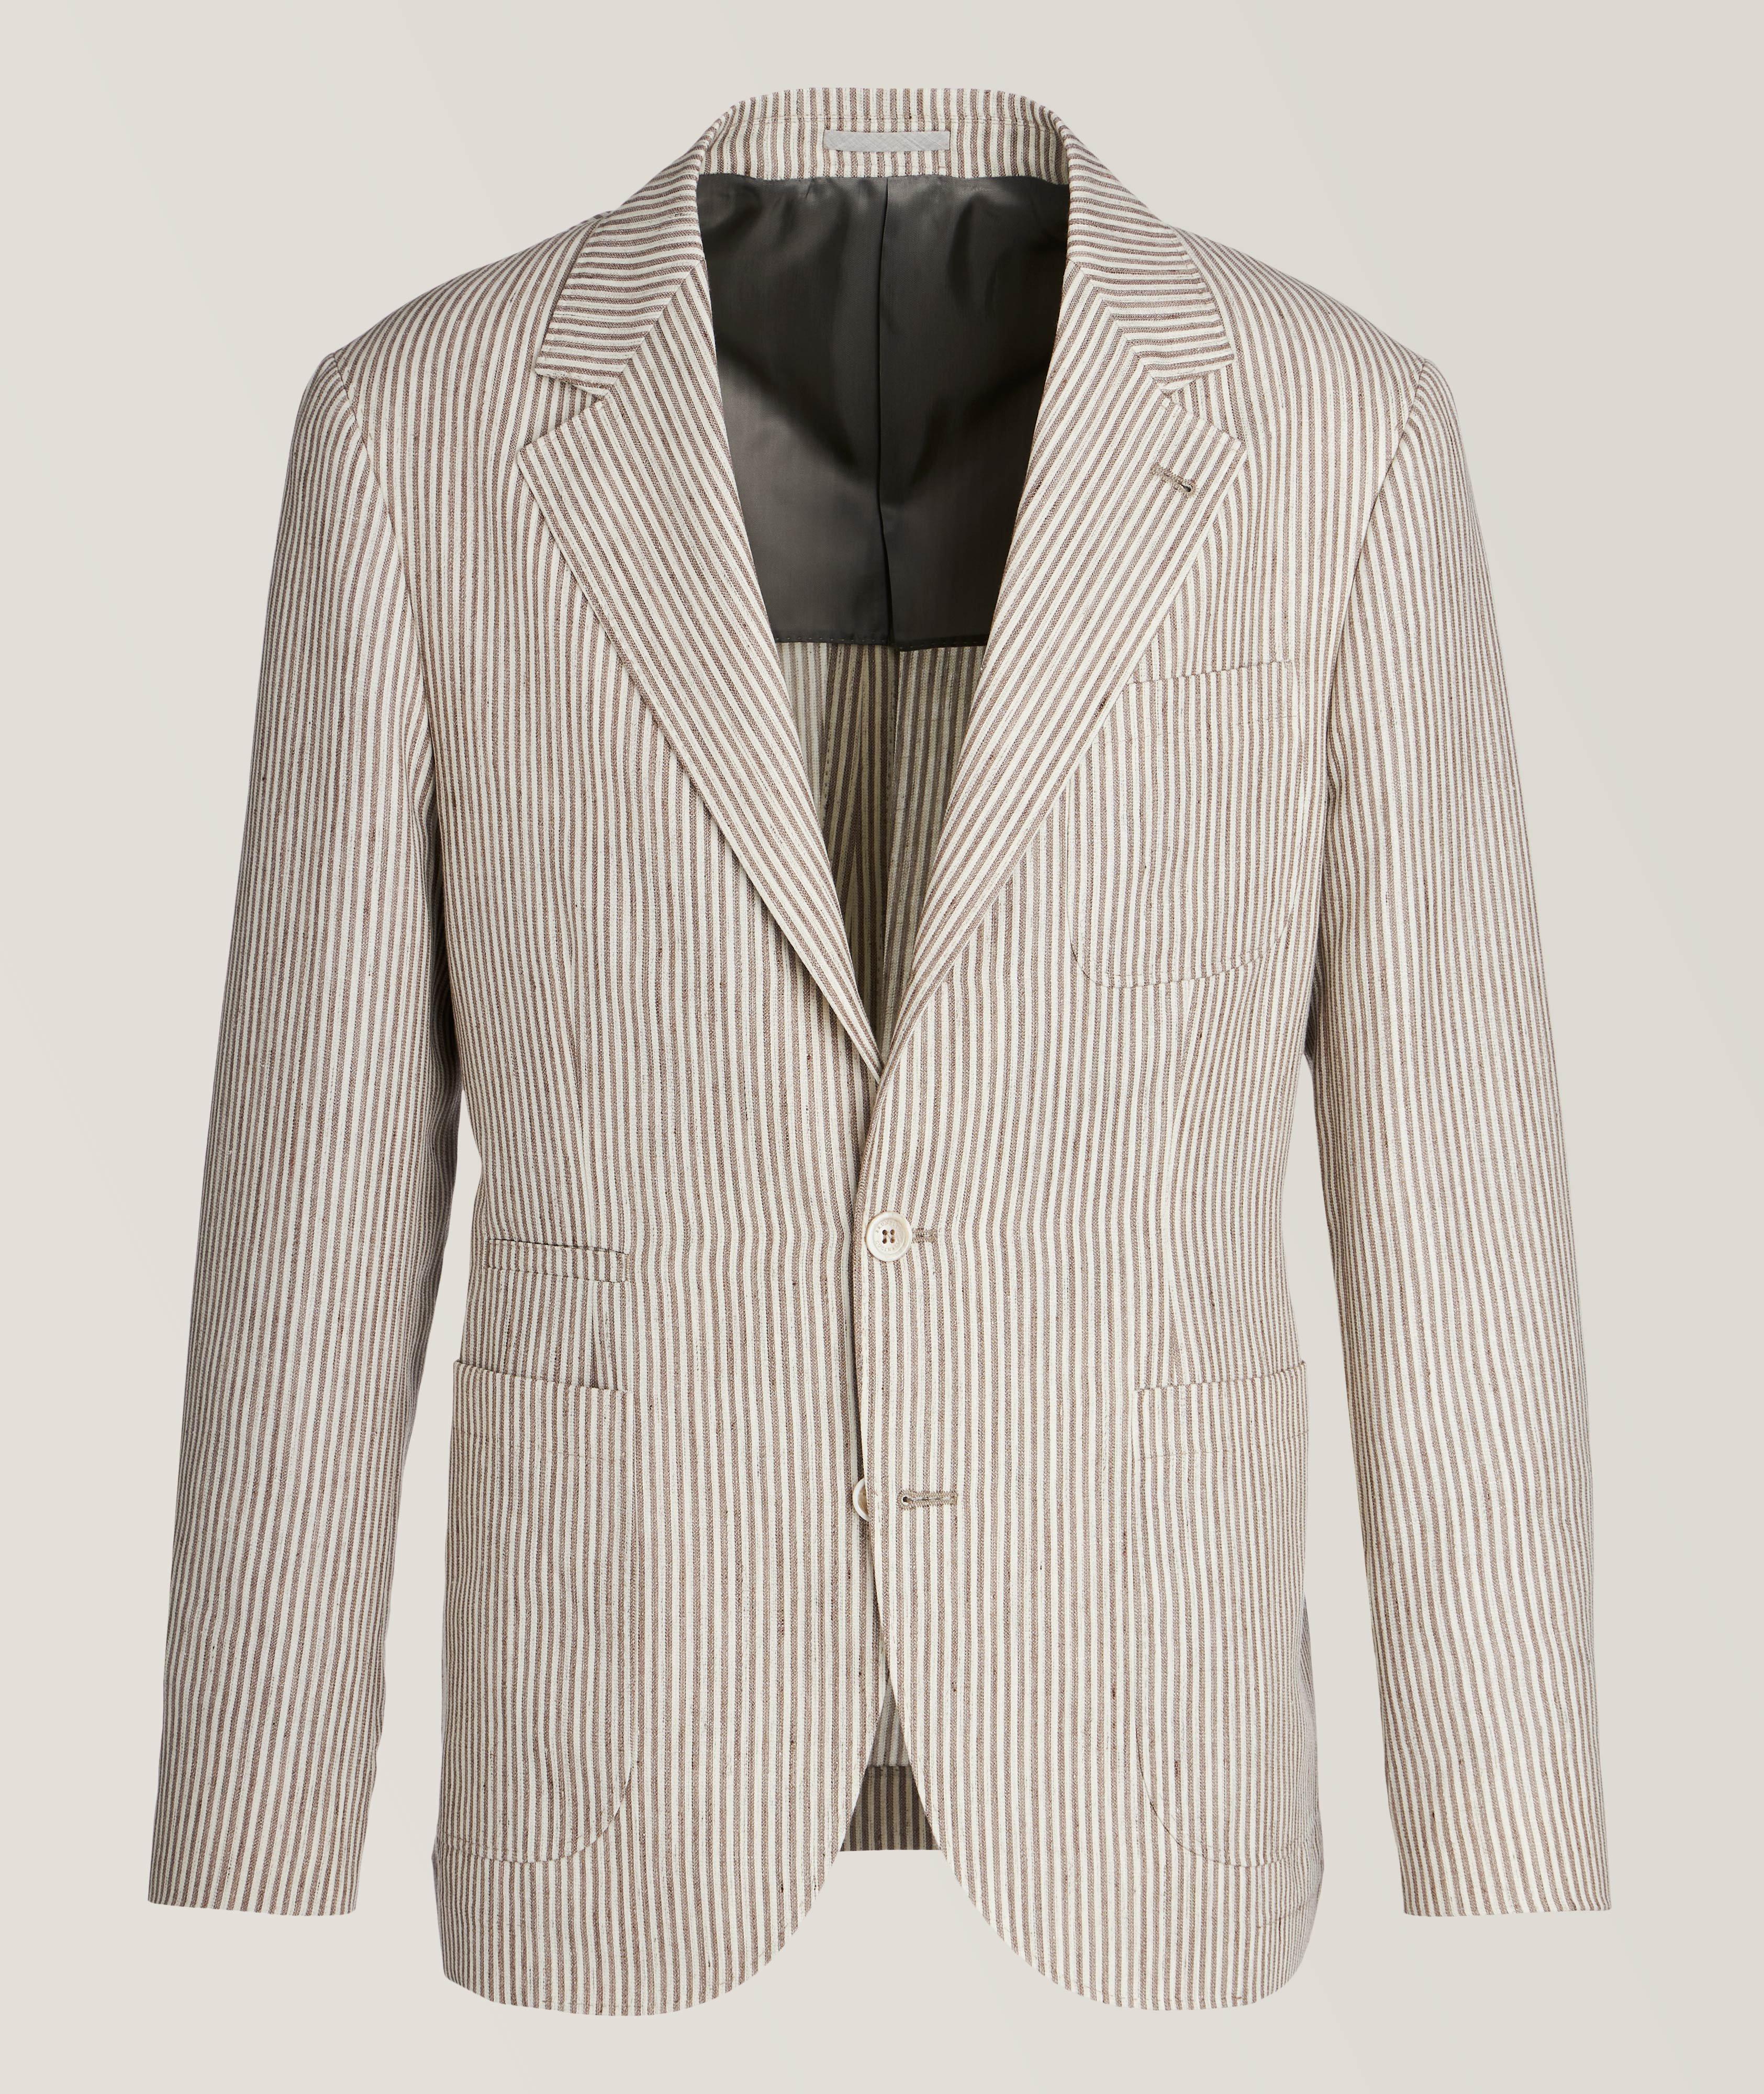 Striped Linen-Wool Unstructured Sport Jacket image 0